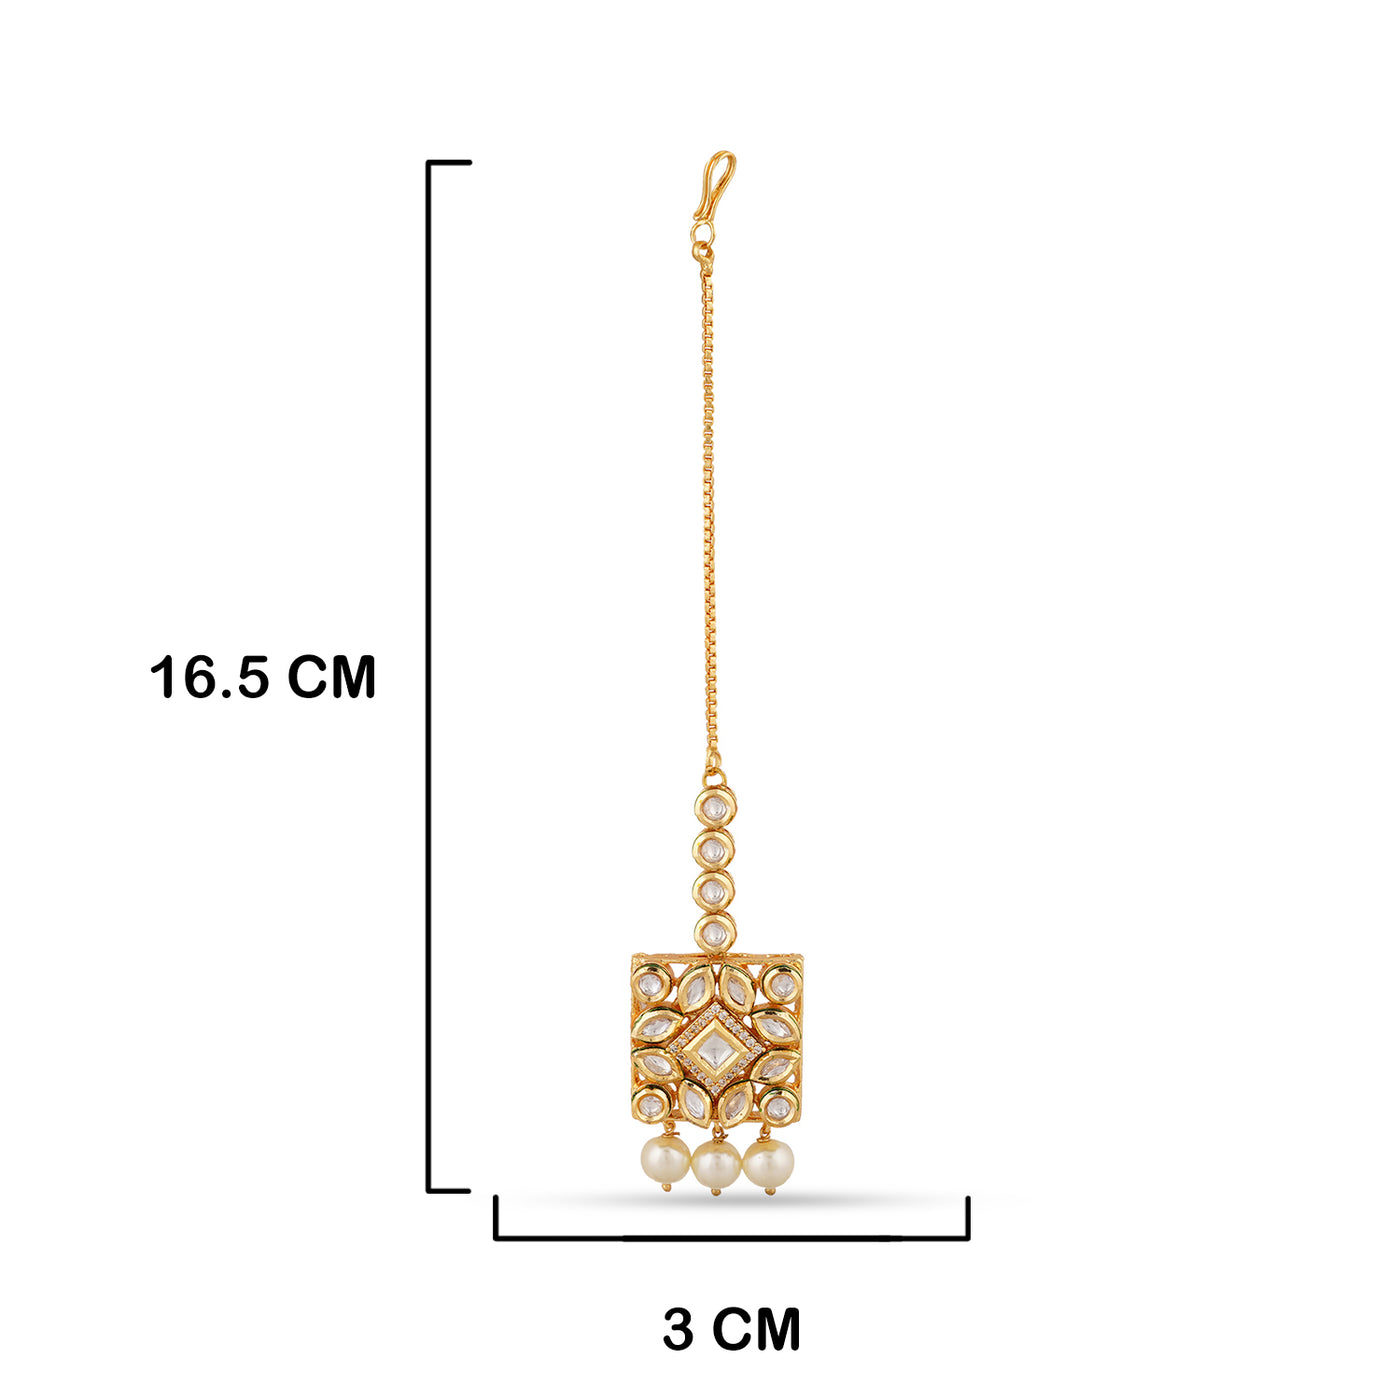 Square Shaped Pearled Kundan Maang Tikka with measurements in cm. 16.5cm by 3cm.